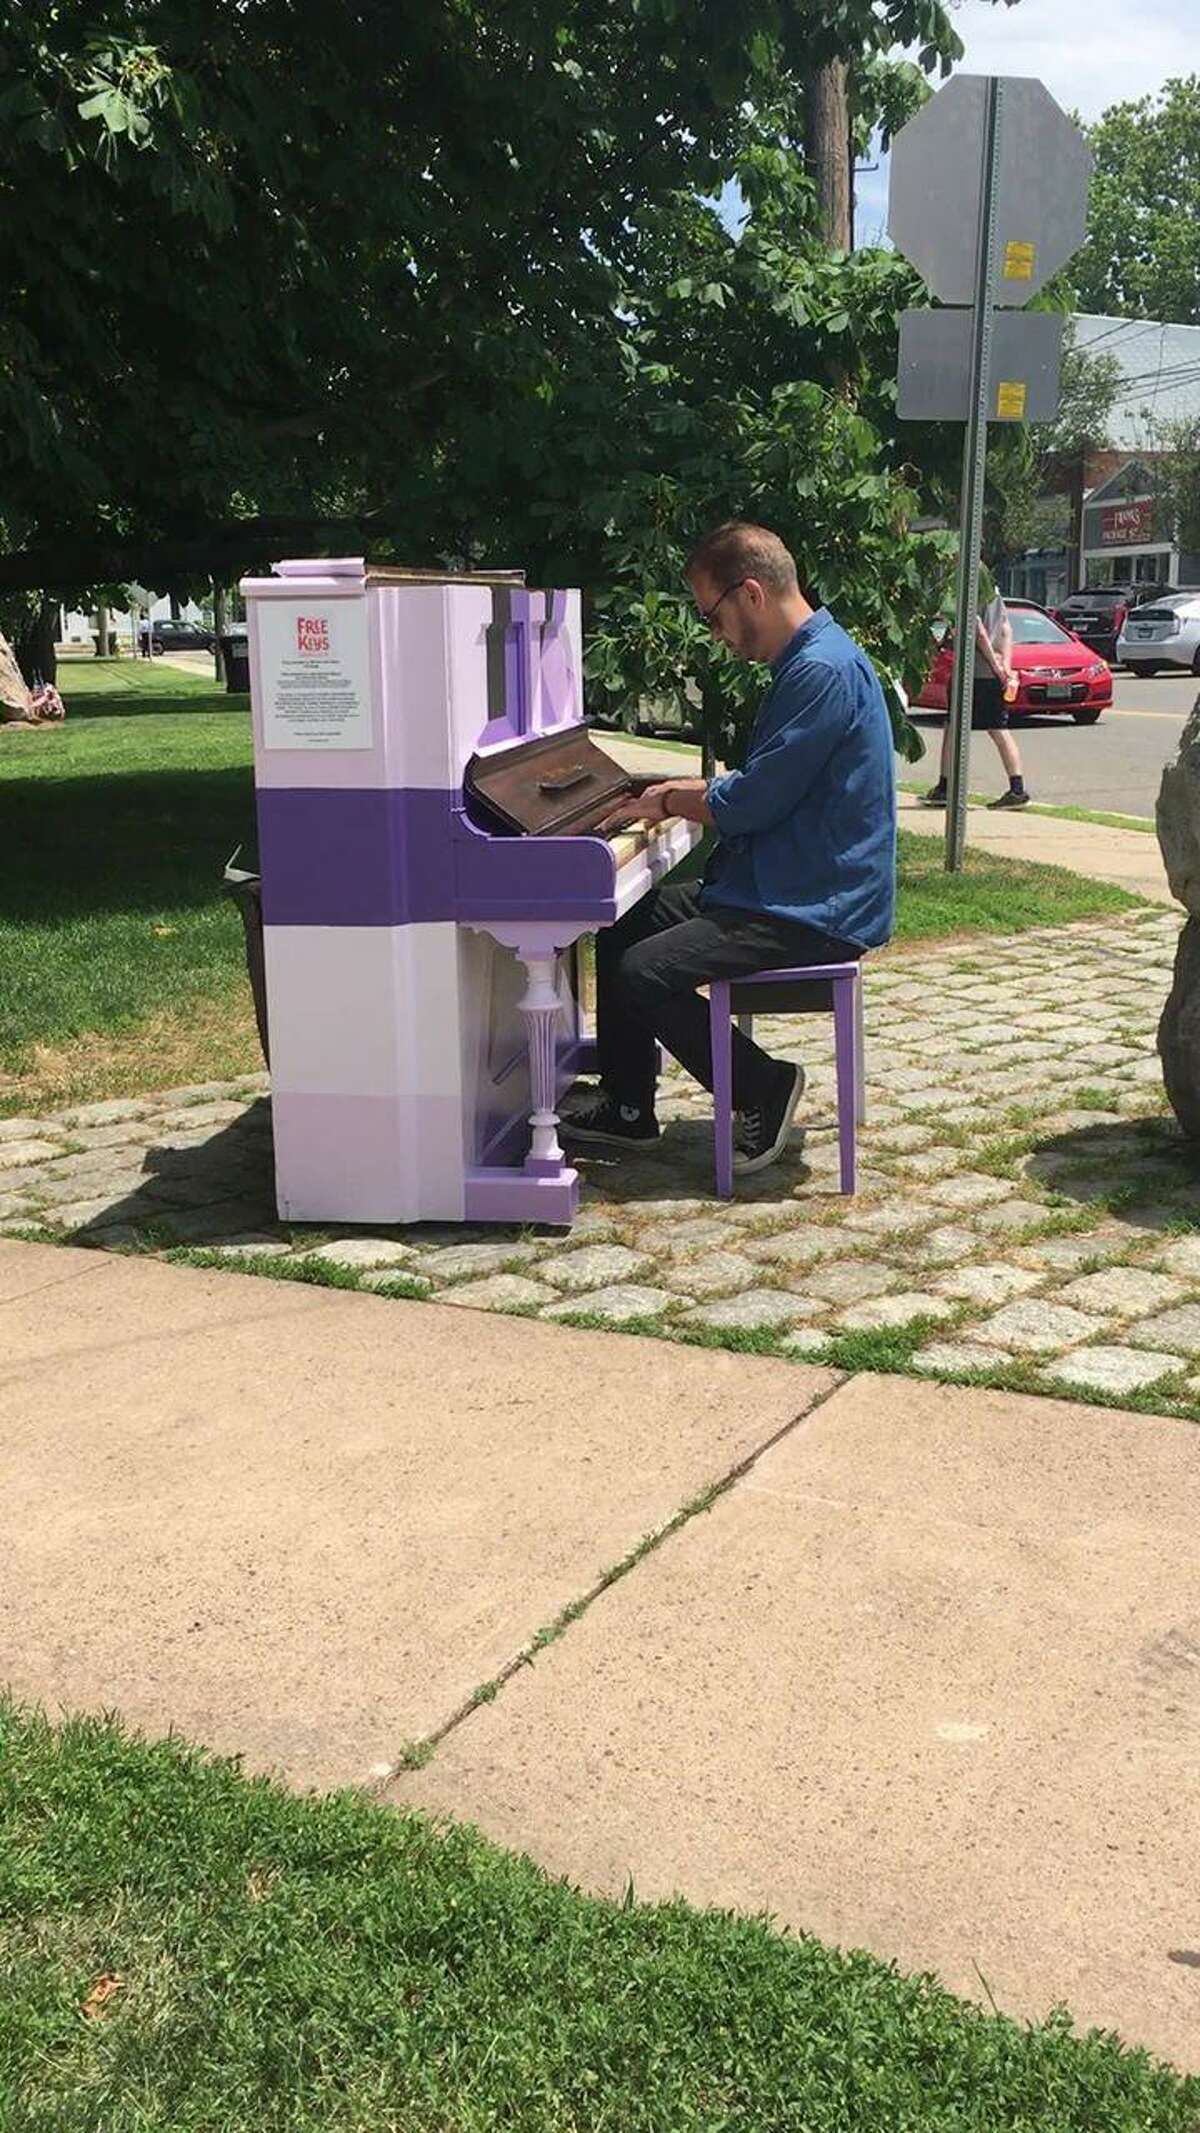 Beginning June 21 on International Make Music Day, 13 pianos painted by local artists and placed in public, outdoor spaces in New Haven, Branford, Guilford, and Madison, Connecticut will become the Free Keys CT Piano Trail.